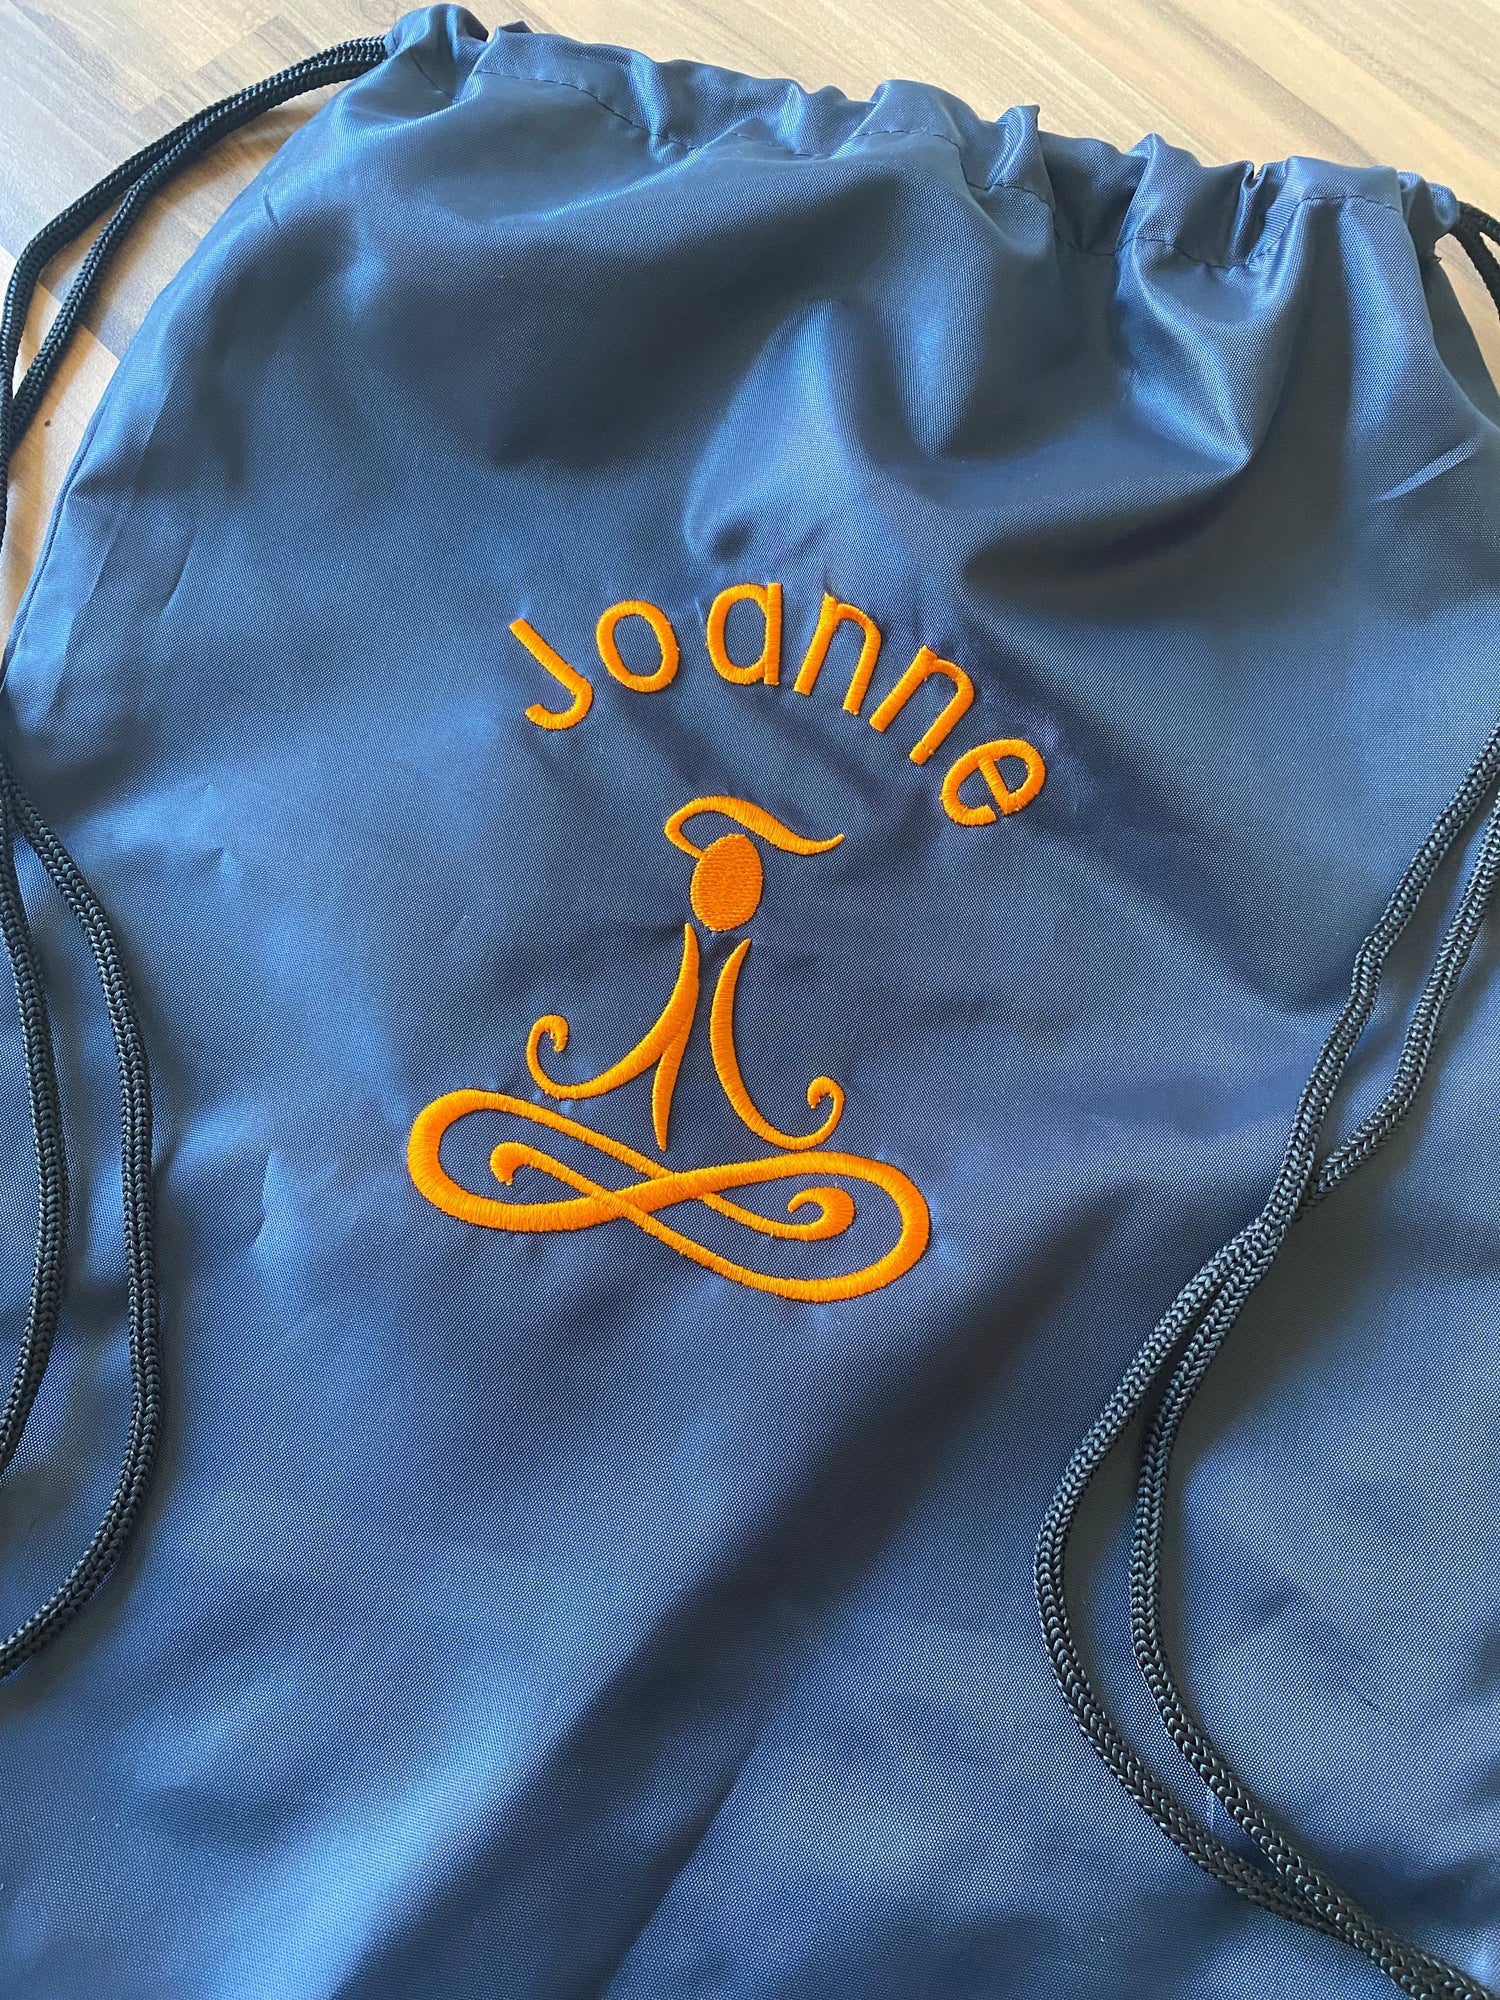 Personalised Embroidered Gym Bags